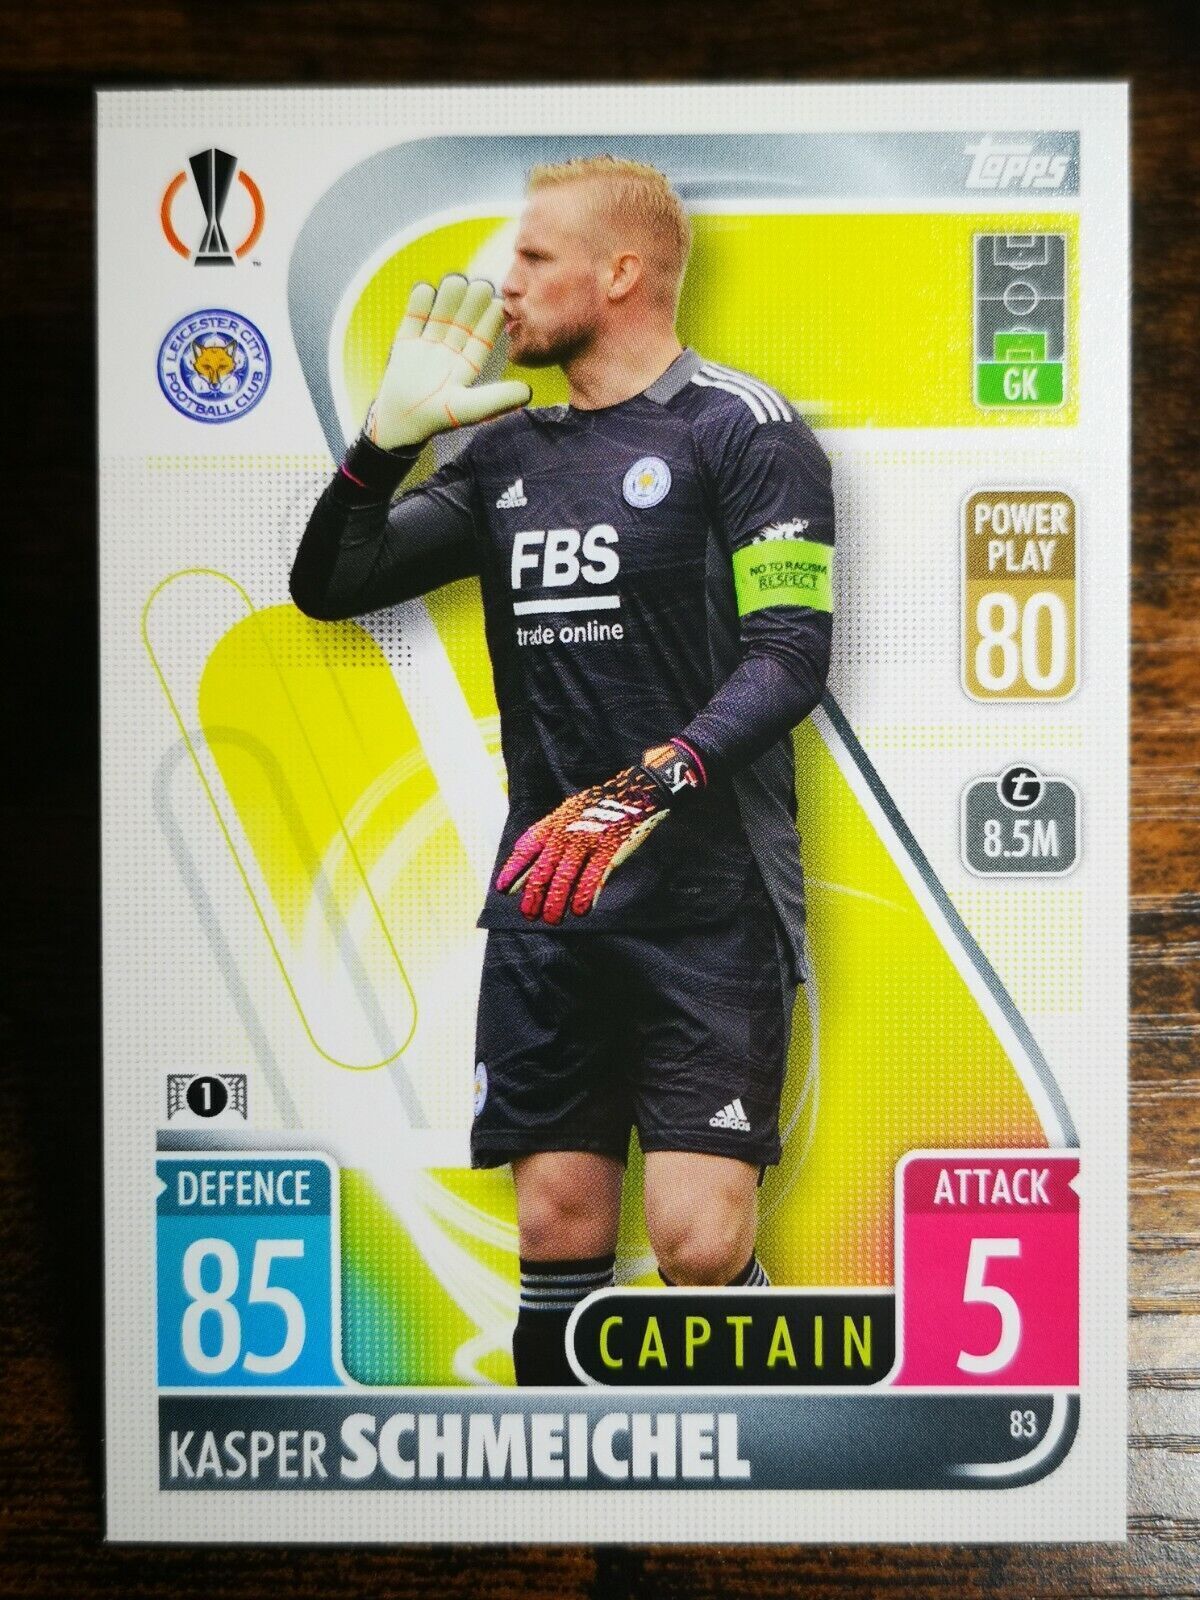 Topps C55 match attax 2021-22 champions league base #83 Schmeichel - Leicester